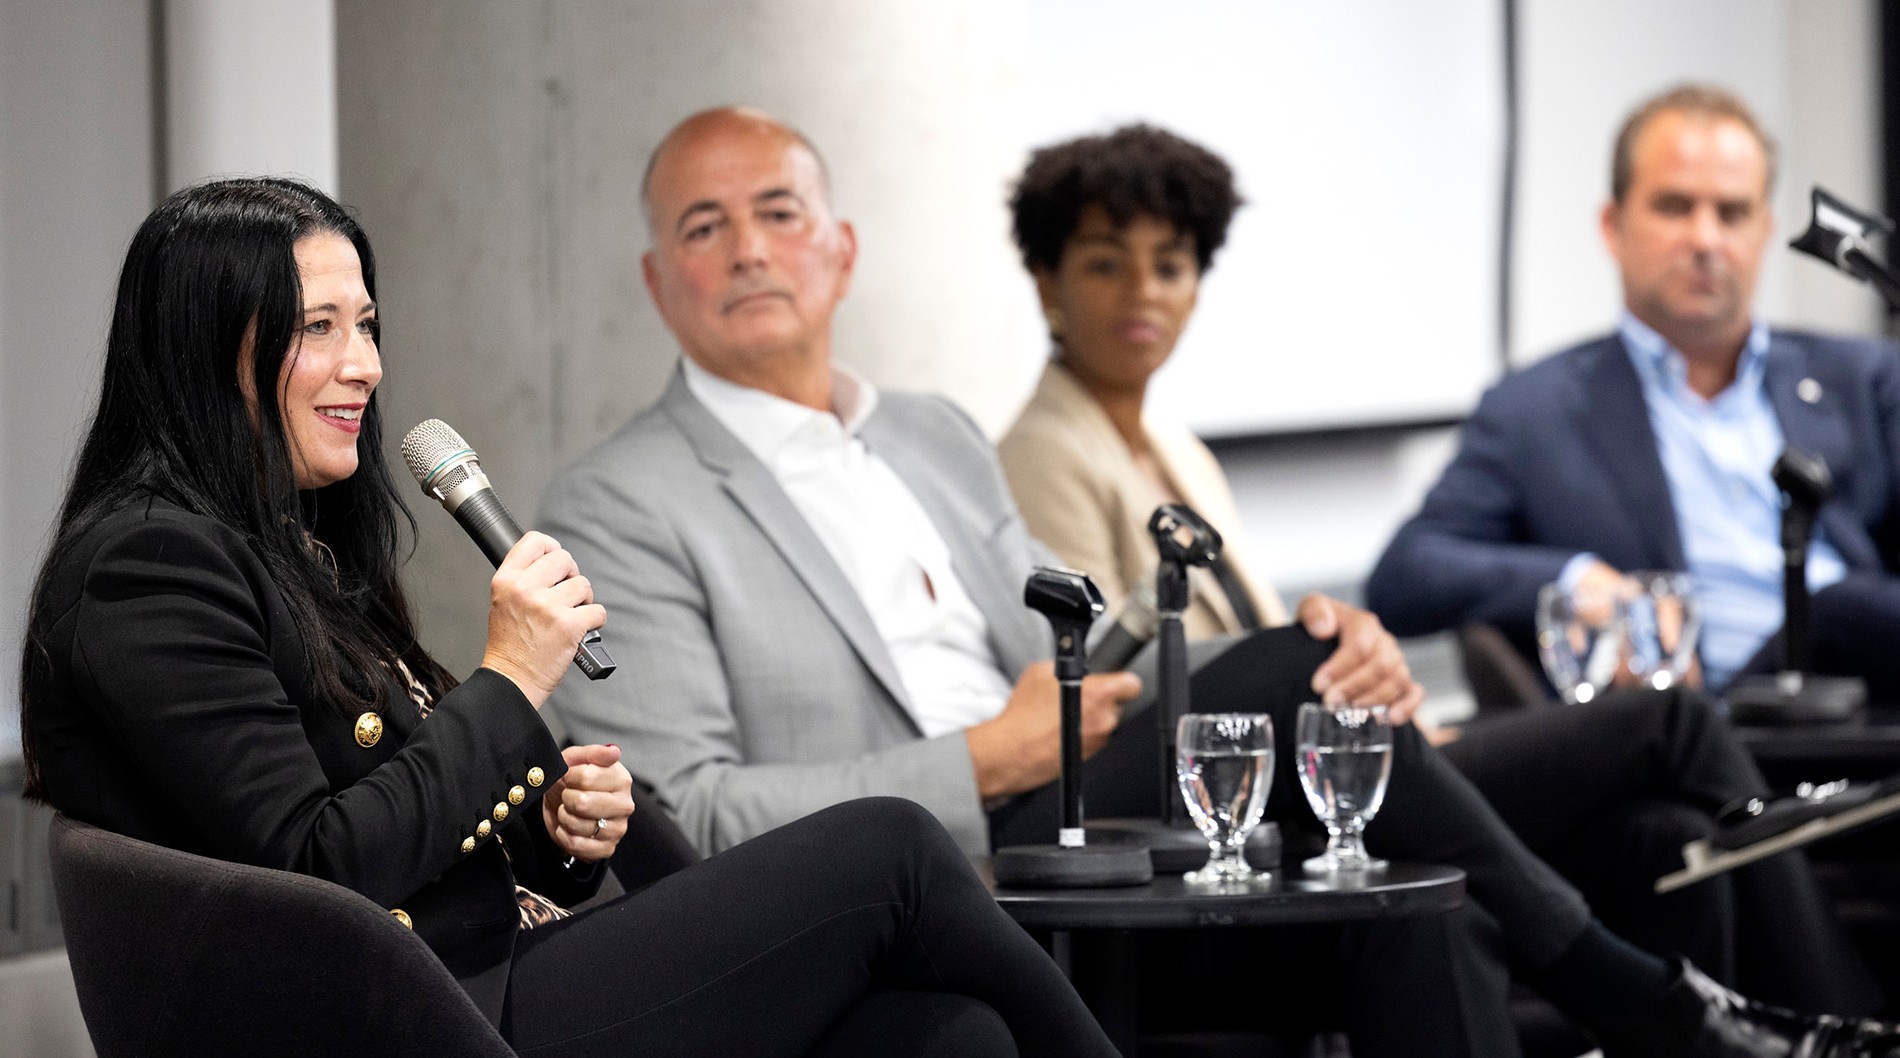 Annick Charbonneau addresses attendees at the Power of Women Entrepreneurs event hosted by the Barry F. Lorenzetti Centre for Women Entrepreneurship and Leadership on September 27, 2022. To her left are Emilio Imbriglio, Nadia Koukoui and Geoffrey Molson.